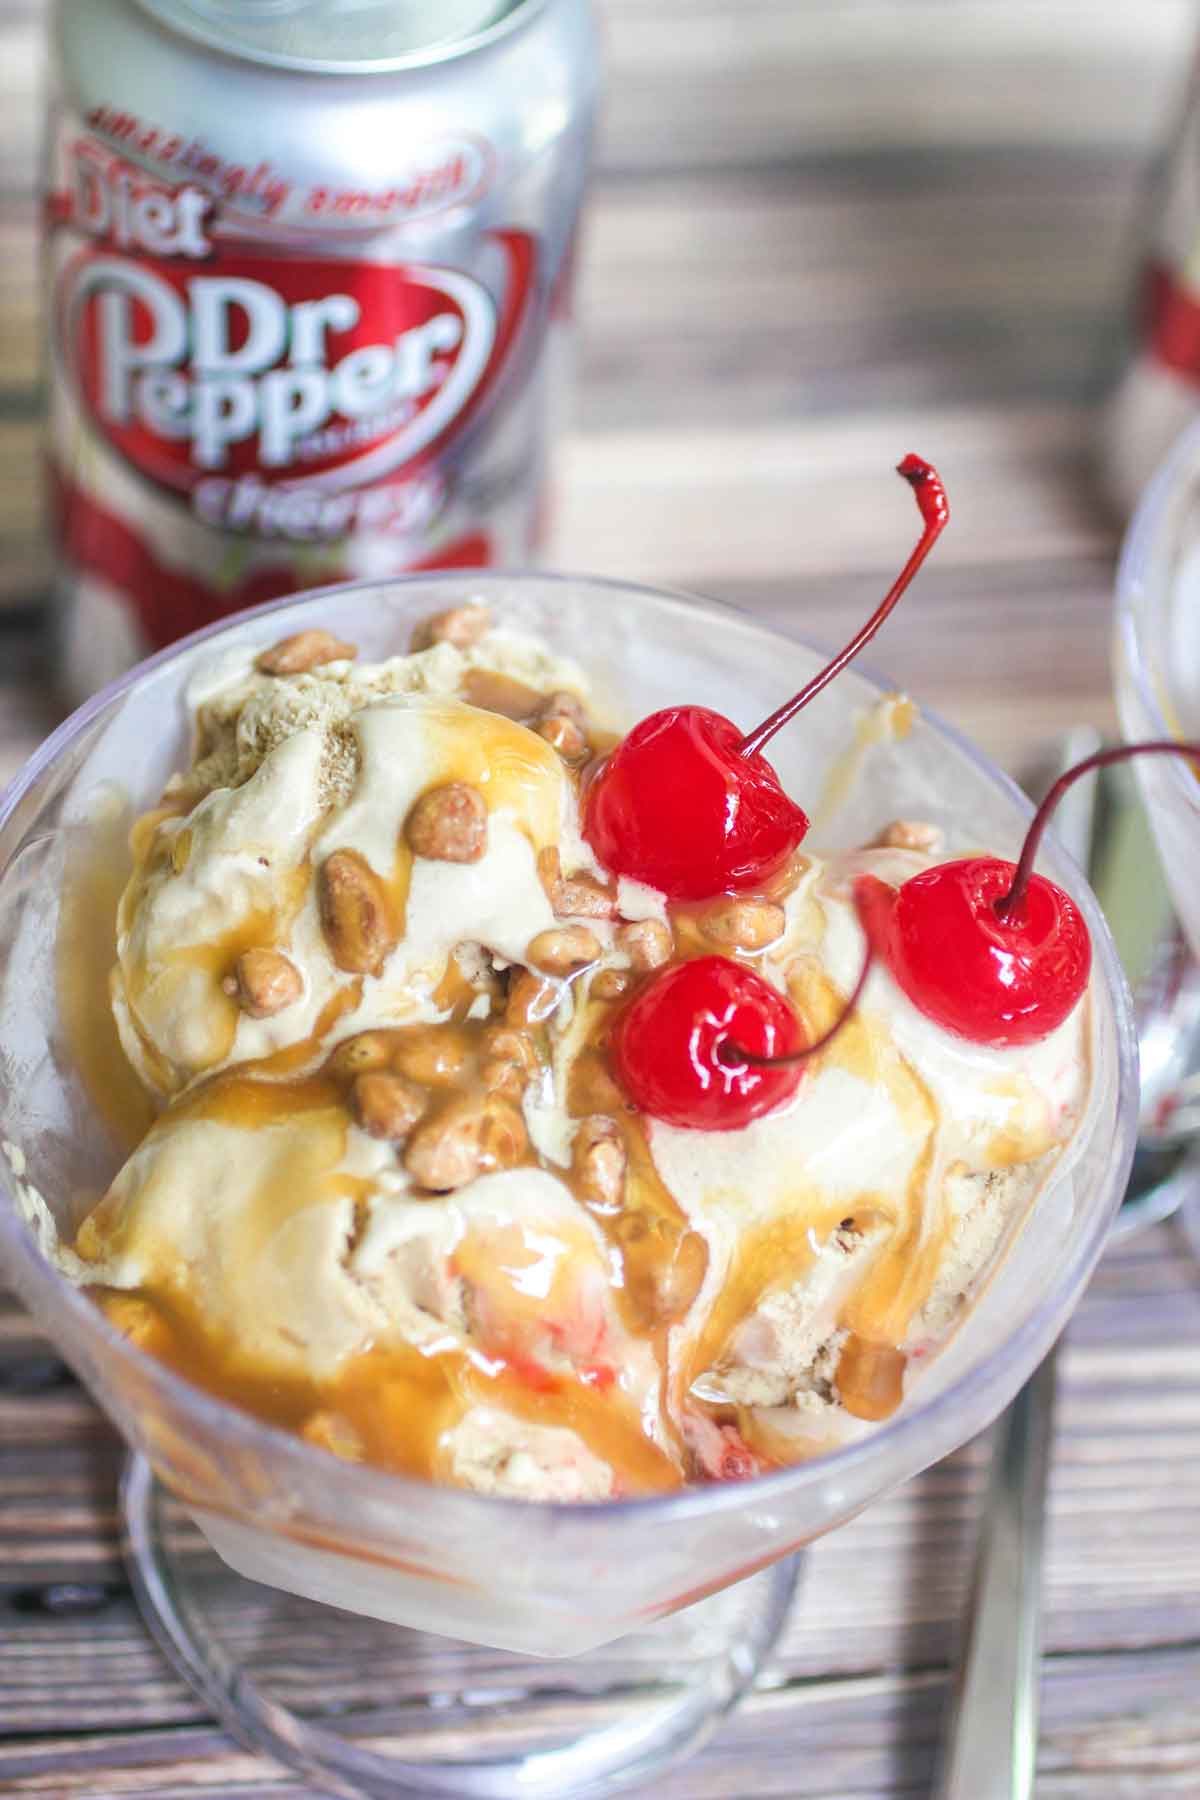 Dr Pepper Cherry Ice Cream with Dr Pepper Cherry Caramel Sauce Hero Image for Post